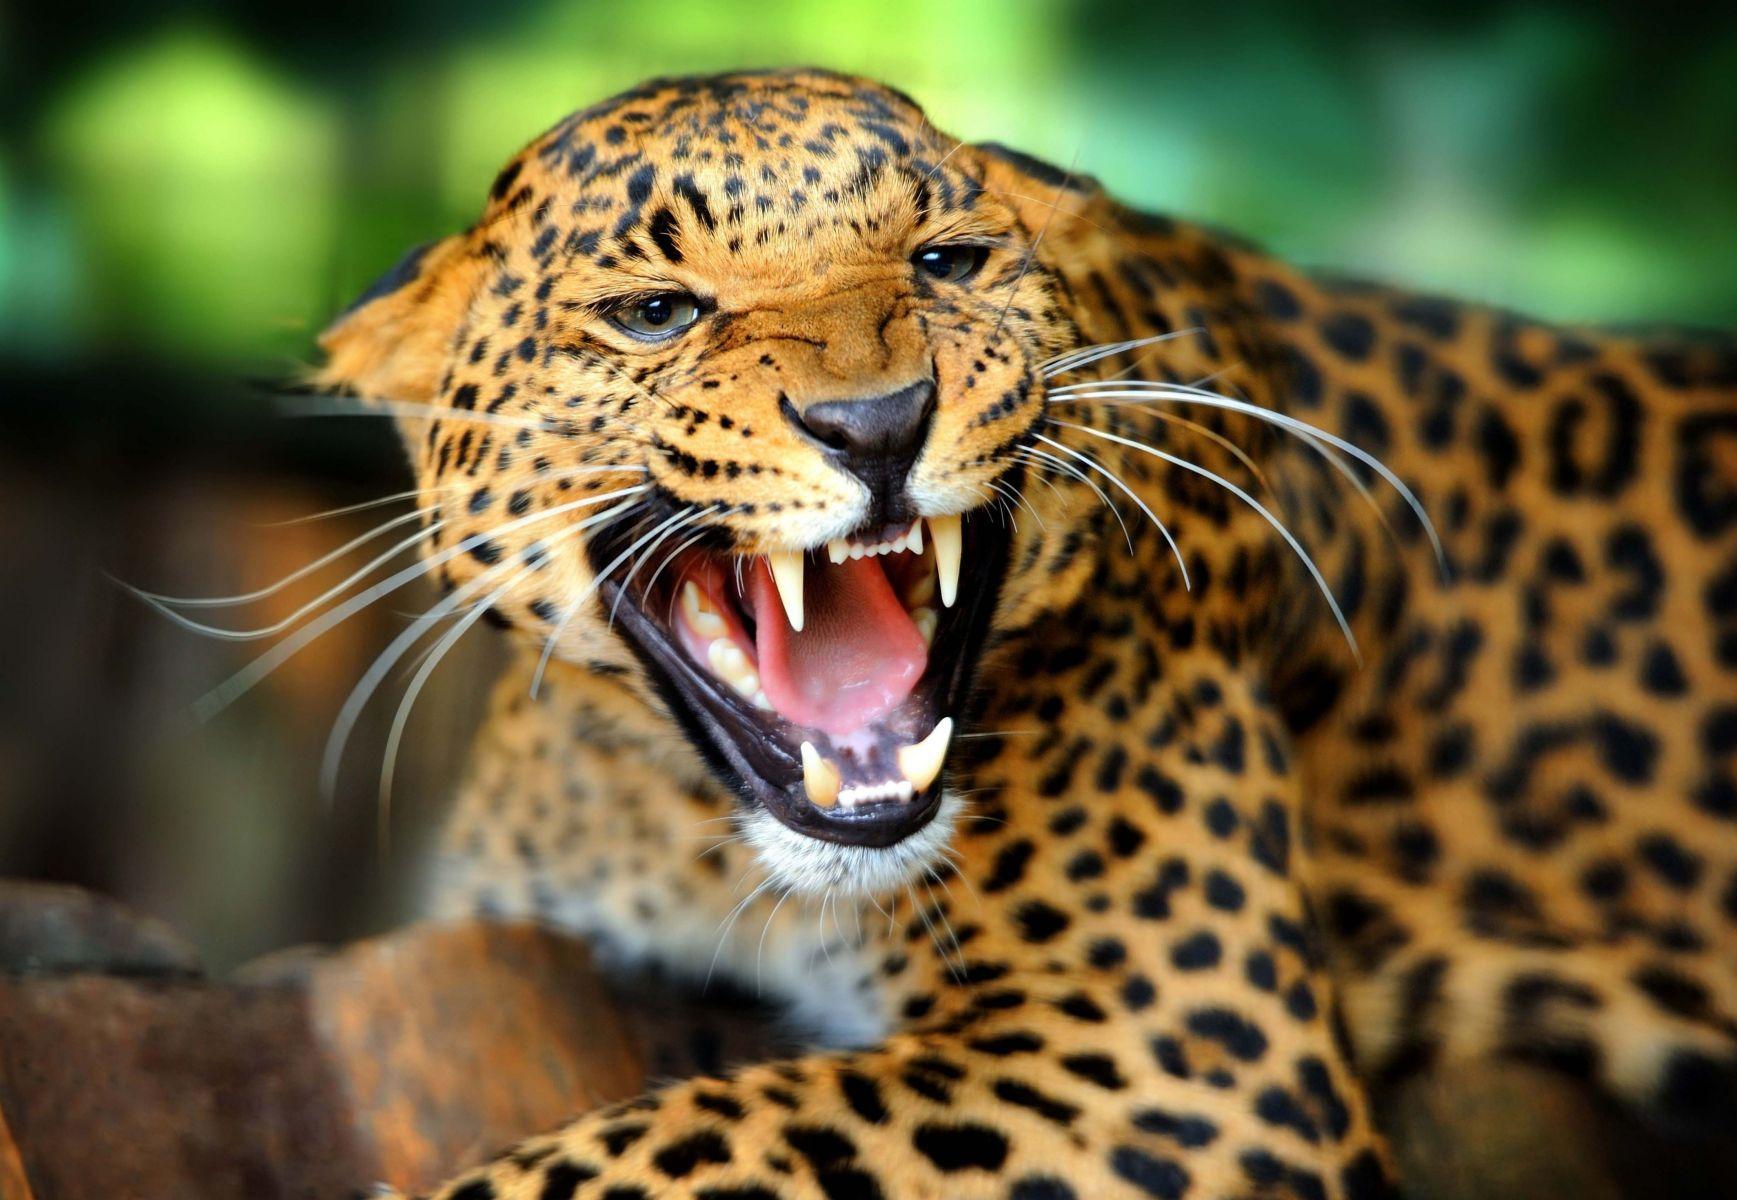 Dangerous leopard. HD Animals and Birds Wallpaper for Mobile